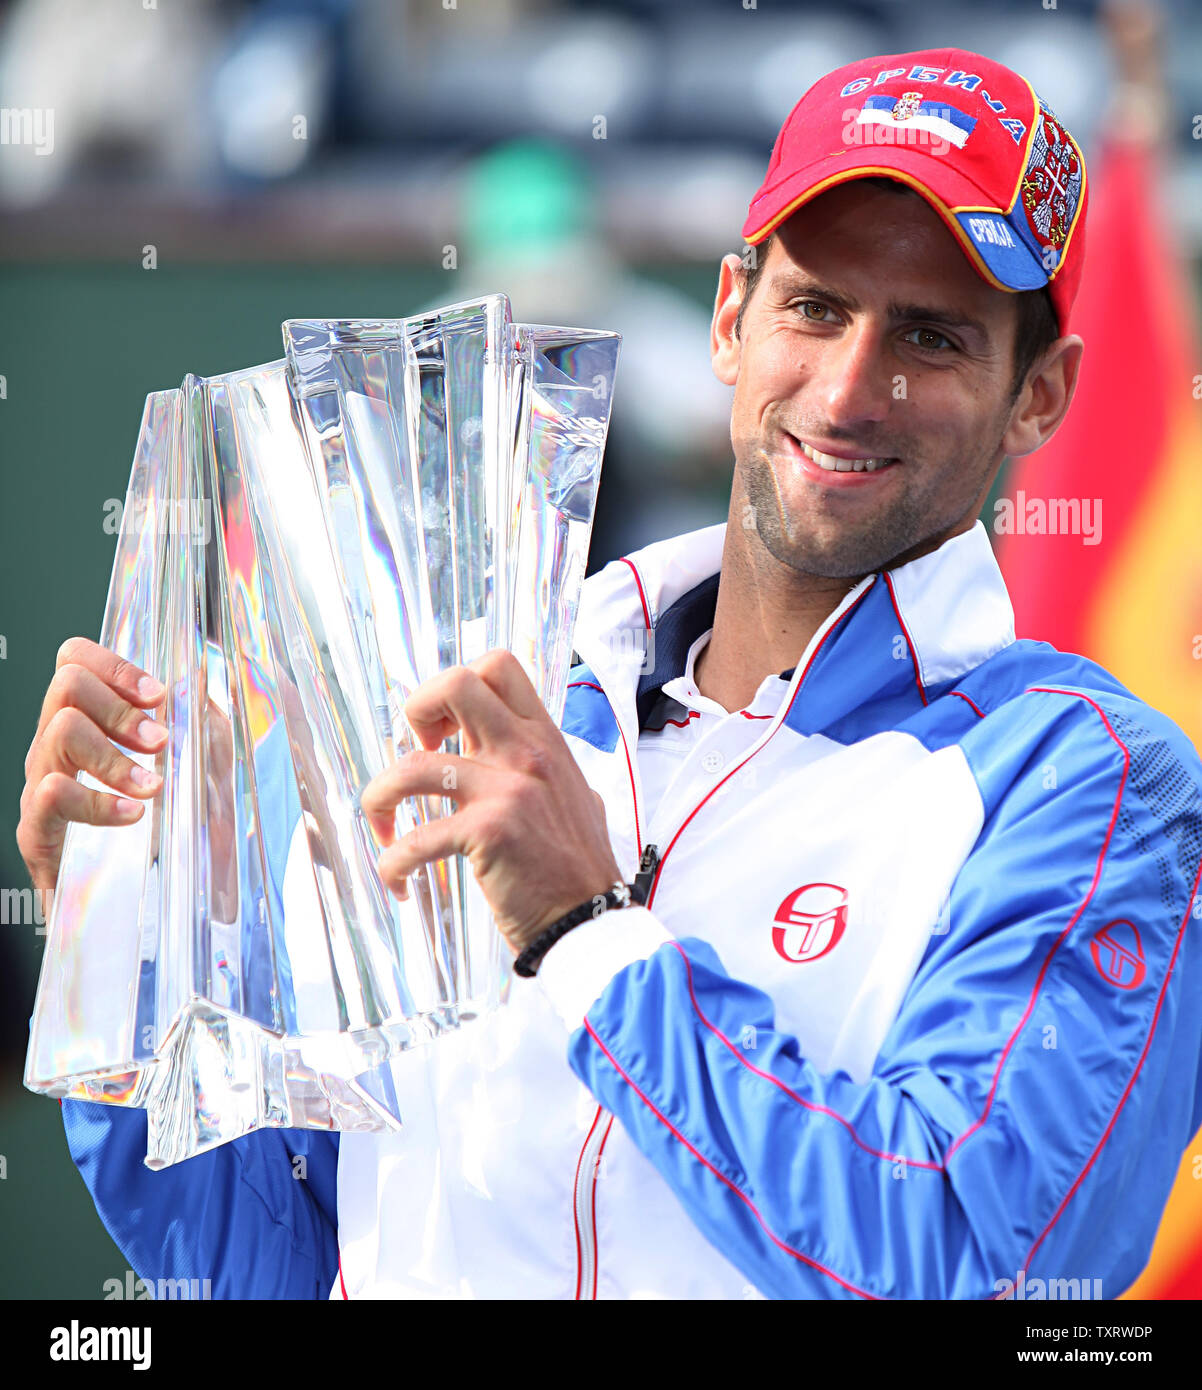 Serbian Novak Djokovic holds the championship trophy after winning his mens final match against Spaniard Rafael Nadal at the BNP Paribas Open in Indian Wells, California on March 20, 2011.  Djokovic defeated Nadal 4-6, 6-3, 6-2 to win the tournament.   UPI/David Silpa Stock Photo